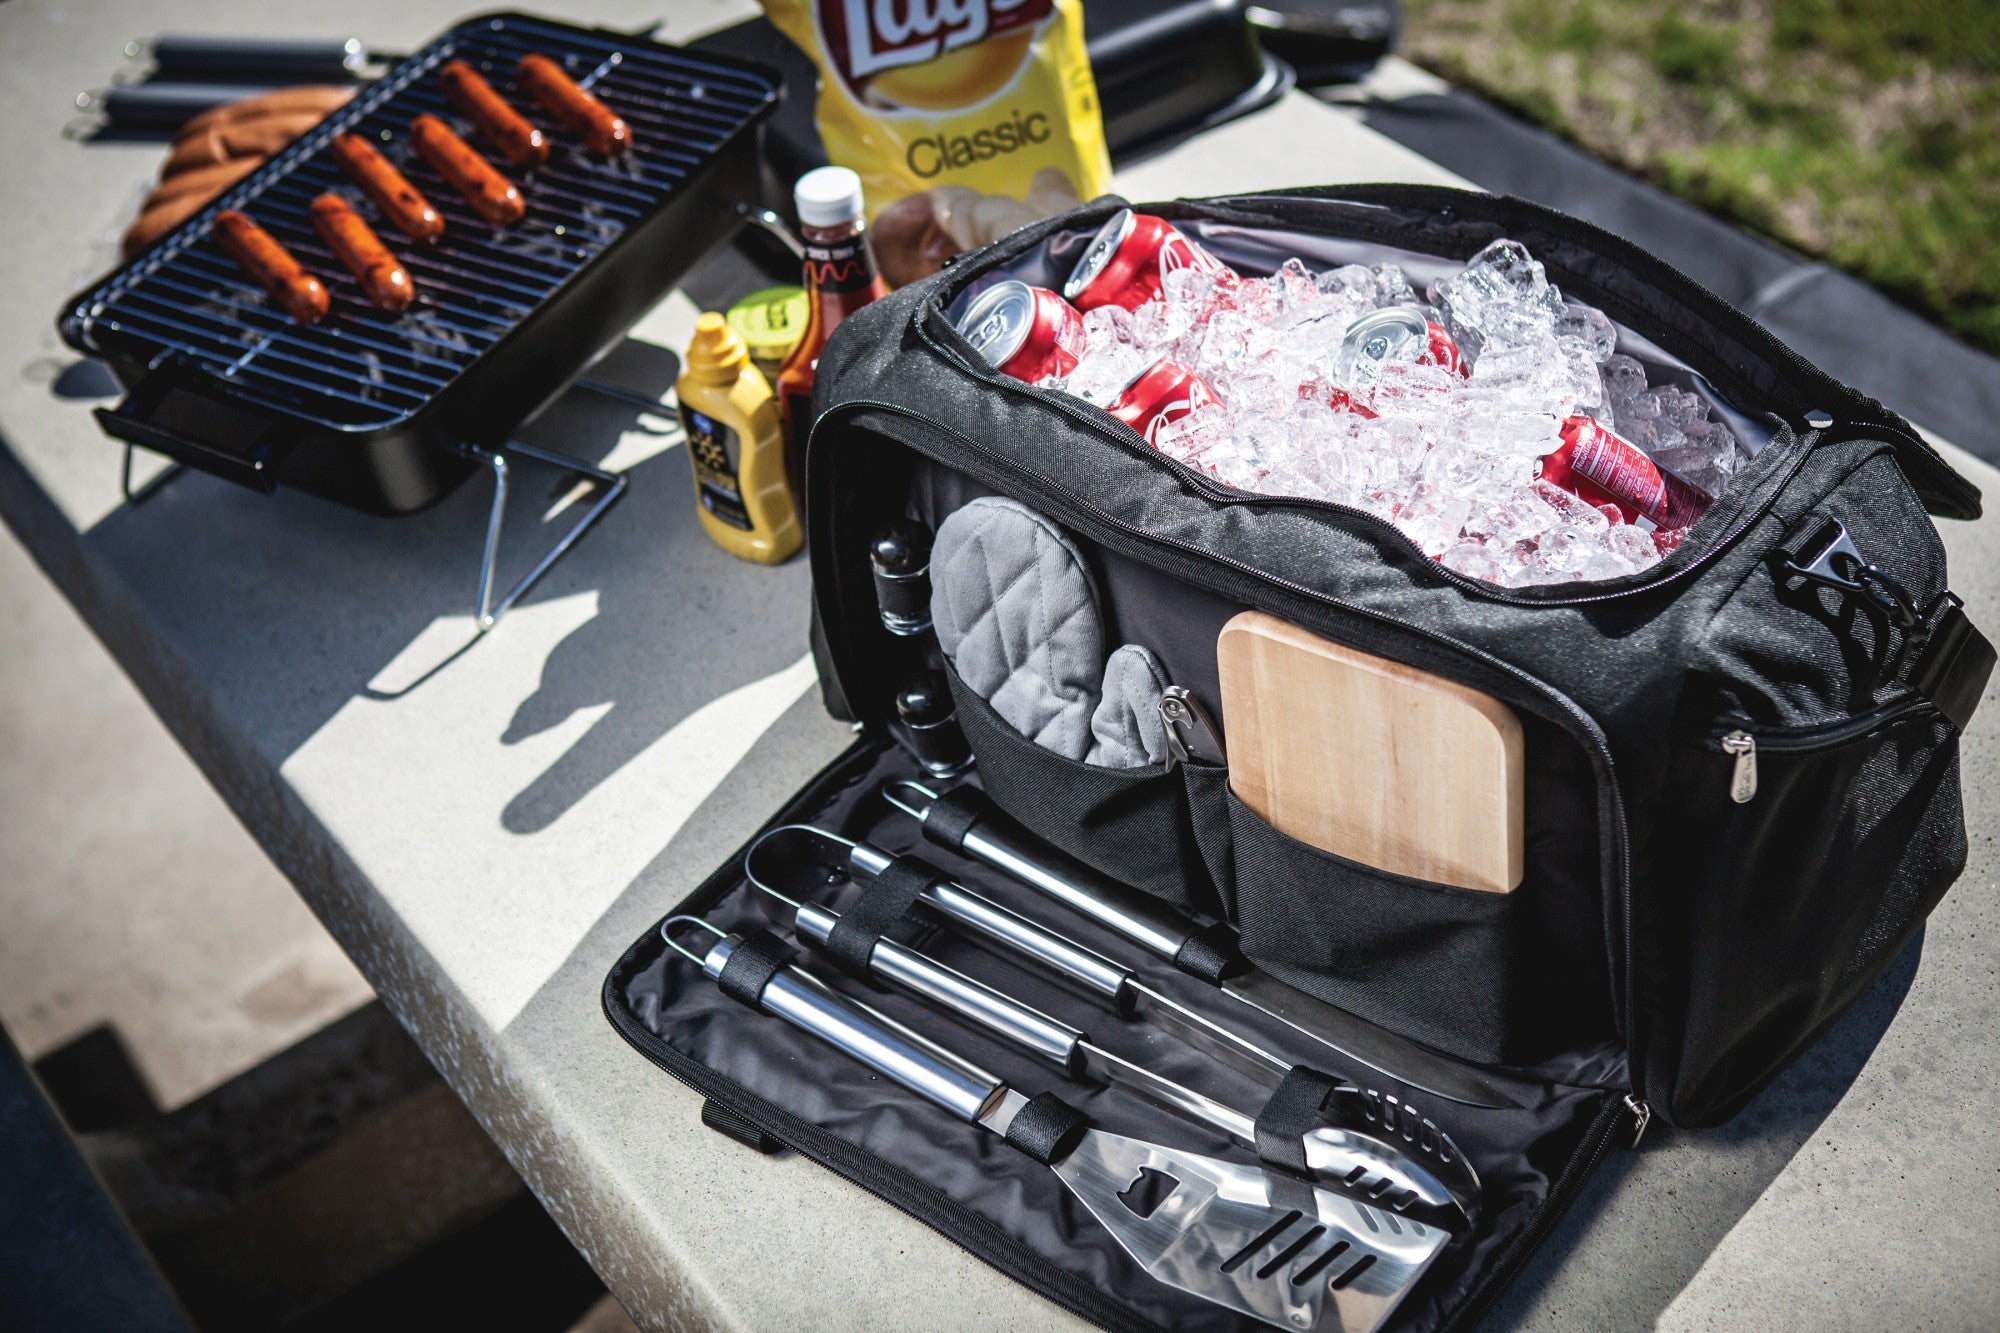 Texas Tech Red Raiders - BBQ Kit Grill Set & Cooler